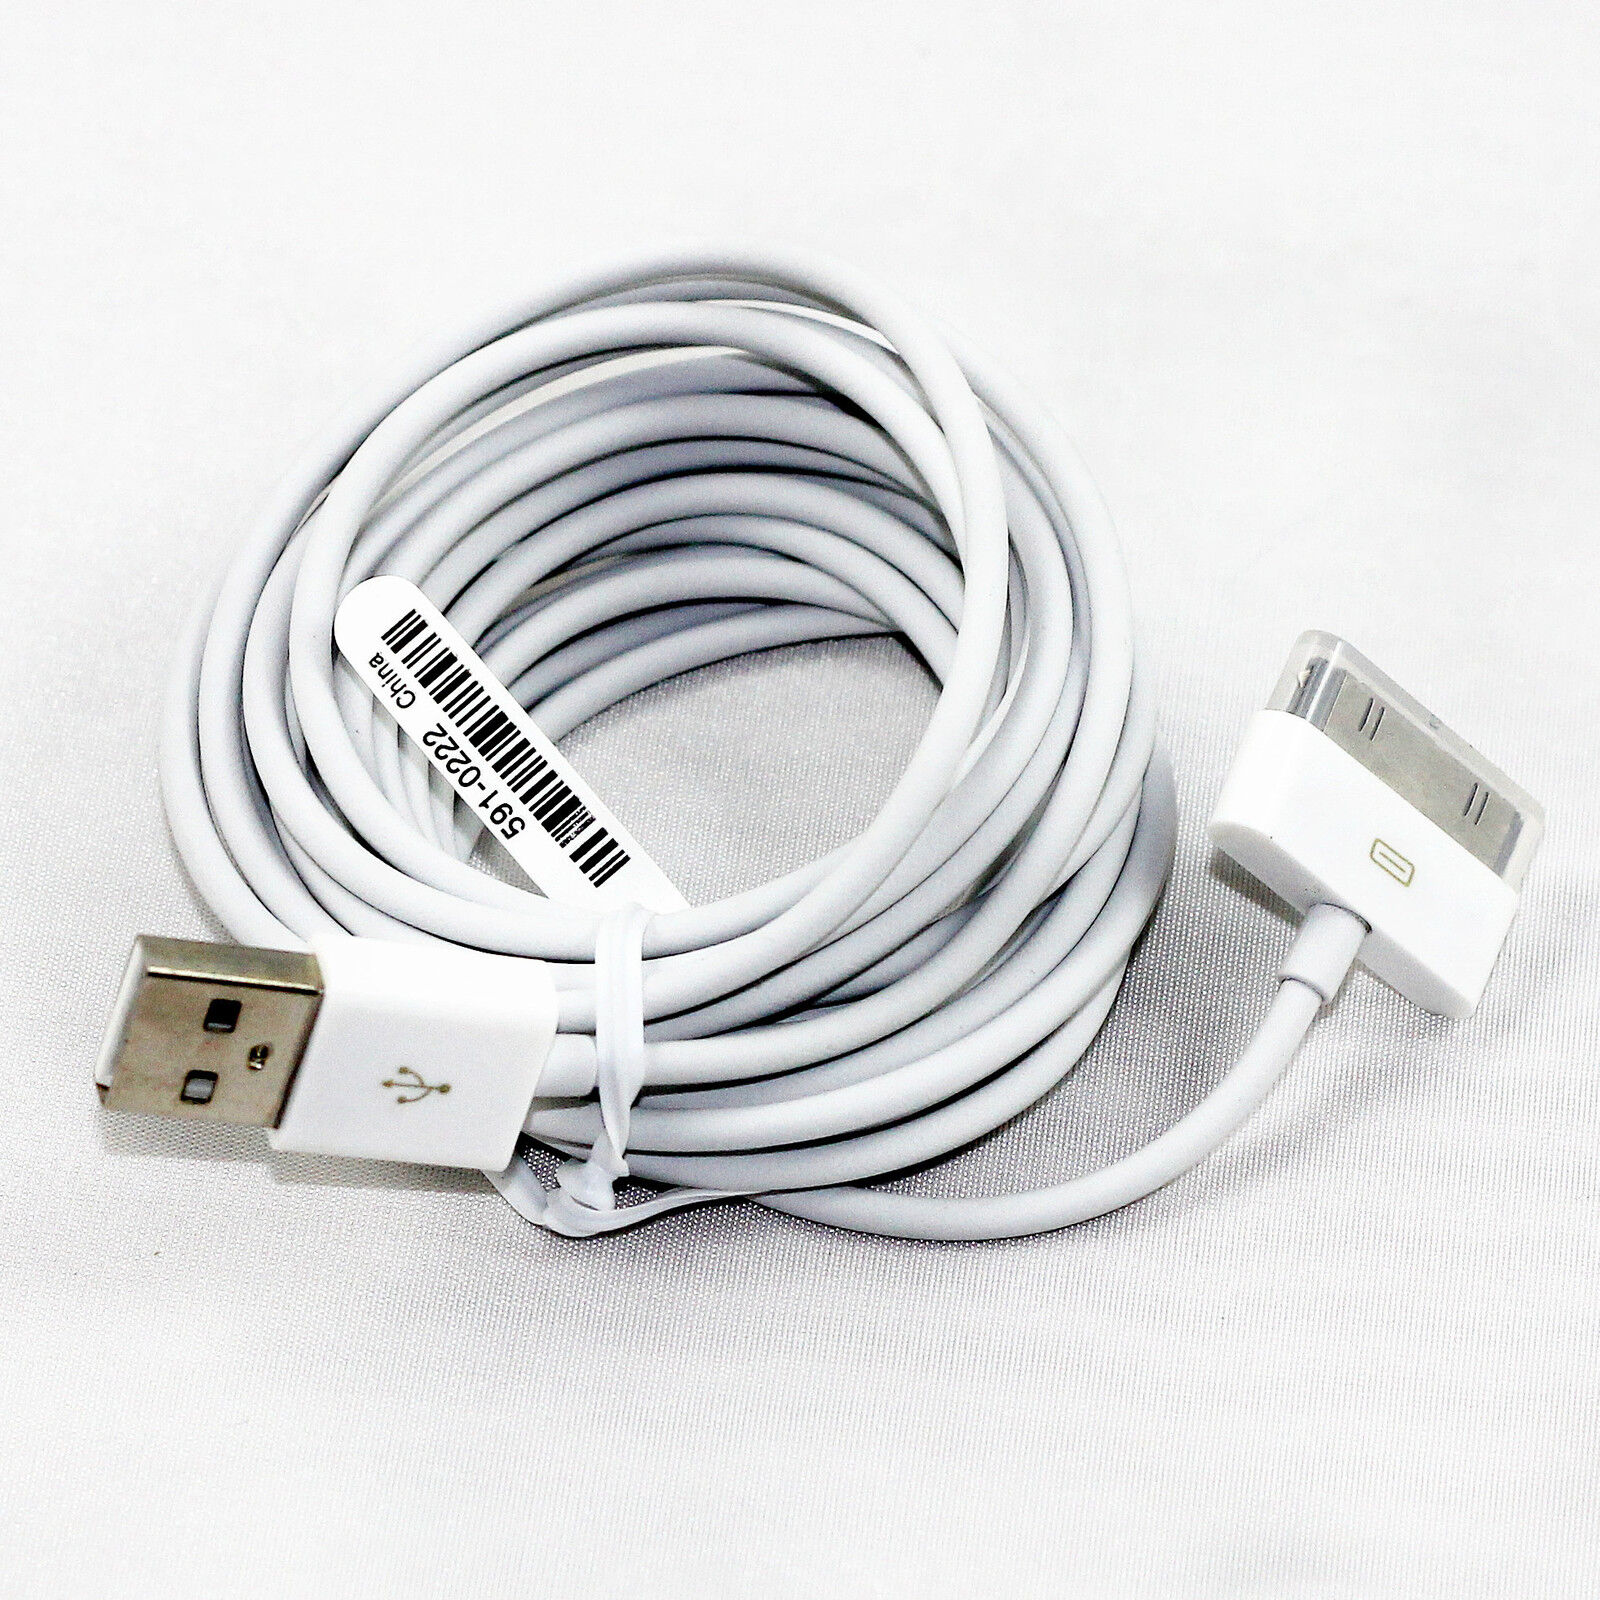 3M 10 Ft USB Sync Data Charger Cable Cord for iPod iPad iPhone 4 4S US Fast Ship